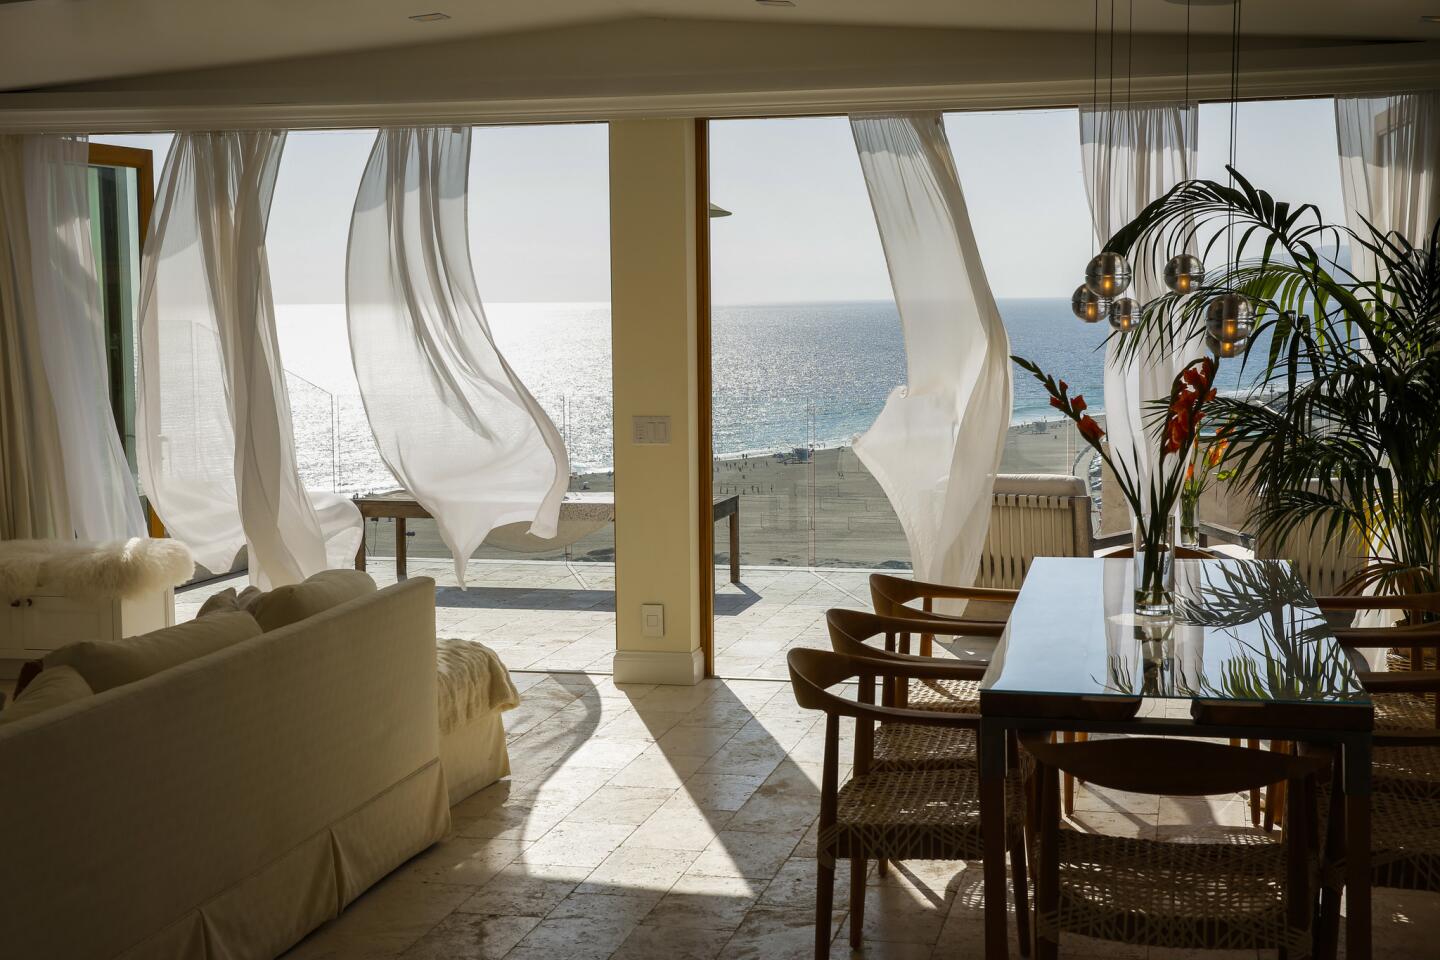 Sisters Tessa and Alyssa Hendrie transformed a rundown, double-wide trailer at the Point Dume Club in Malibu into a chic, four-bedroom beach house with stunning views of Zuma Beach. "We didn't want the interiors to distract from the view," says designer Tessa Hendrie.